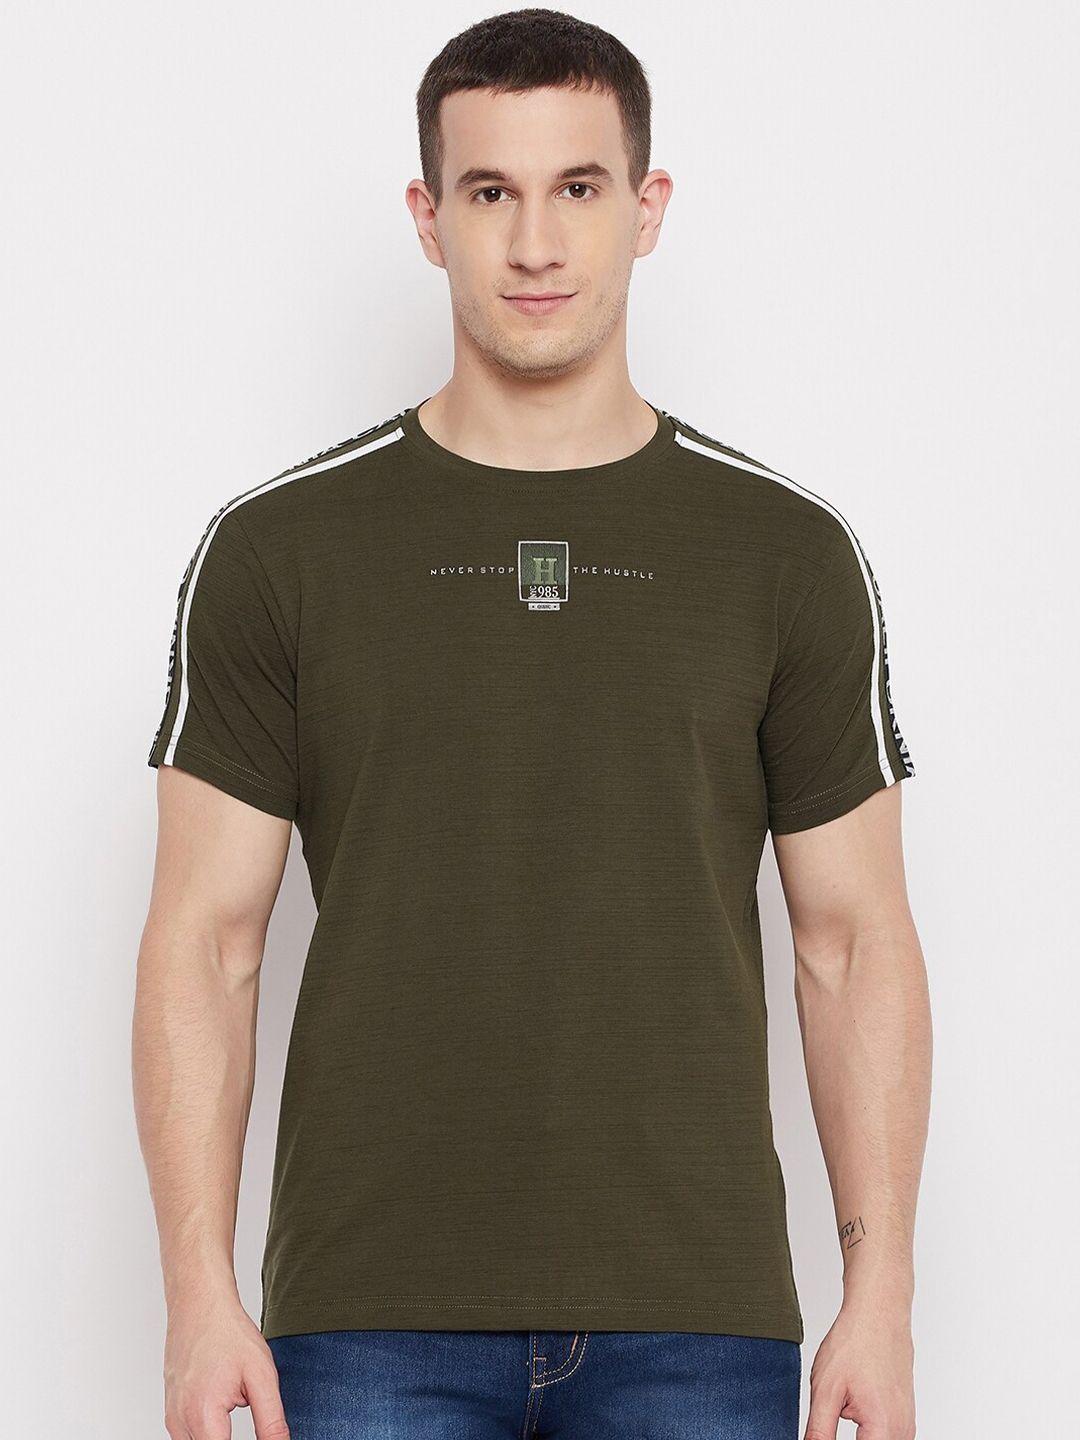 qubic men olive green typography printed t-shirt